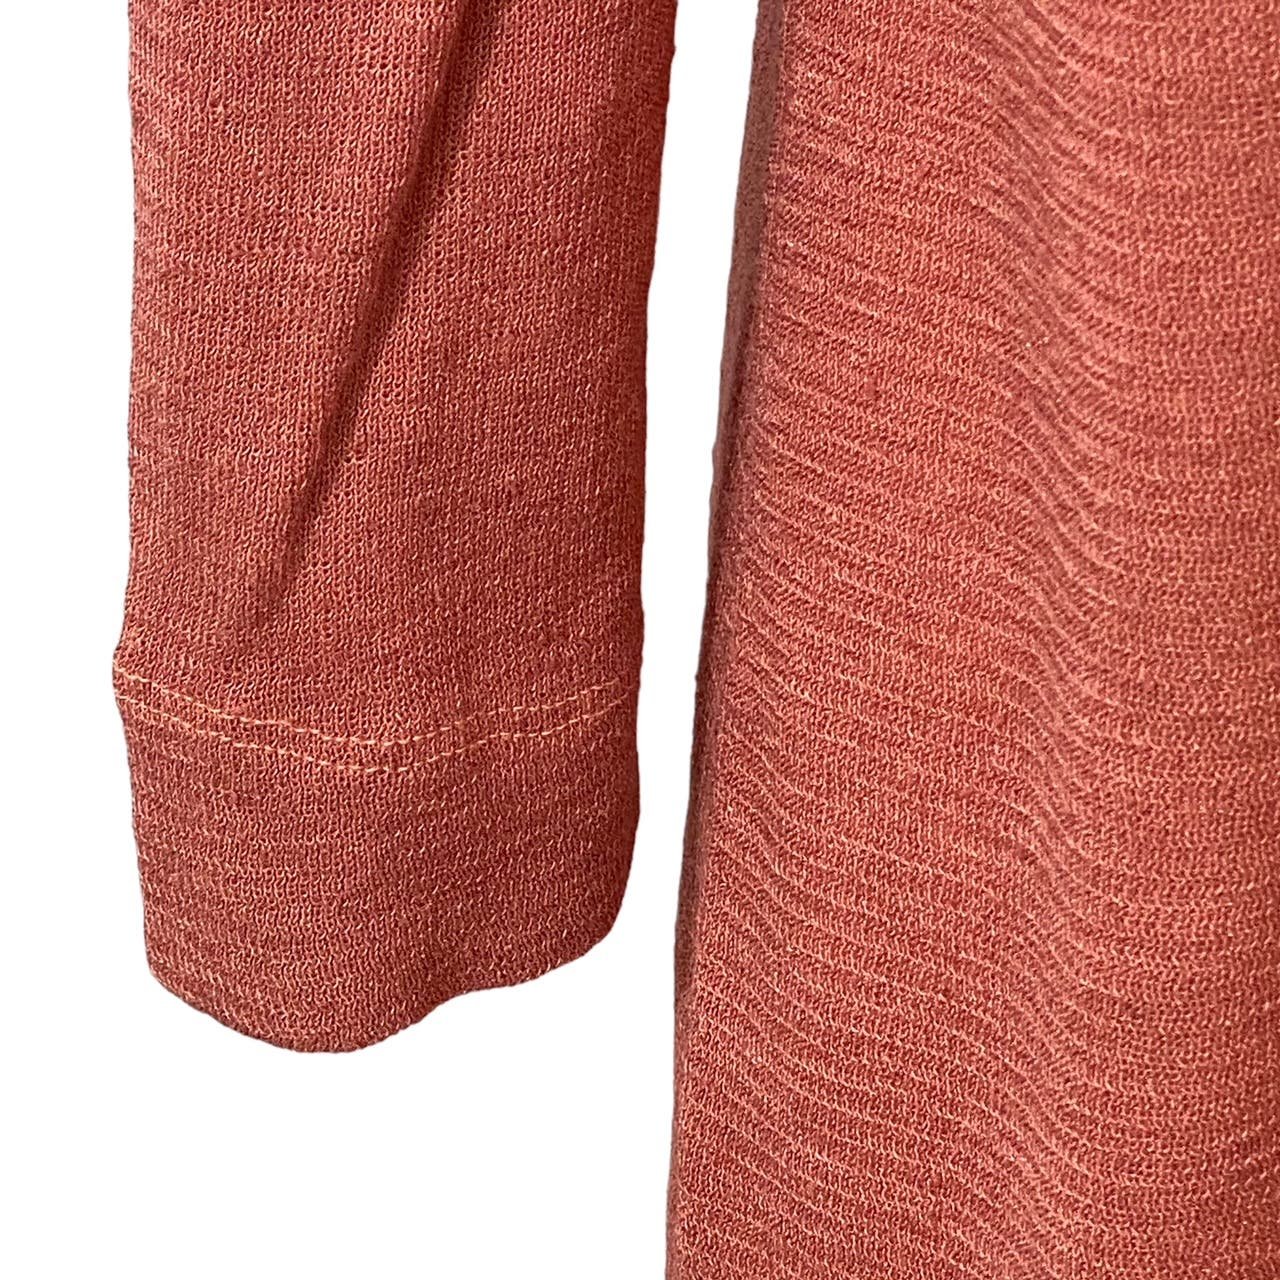 Exclusive Eileen Fisher Long Open Cardigan Coral Dusty Rose Organic Linen Nylon Blend S pOTr5KMjn Store Online